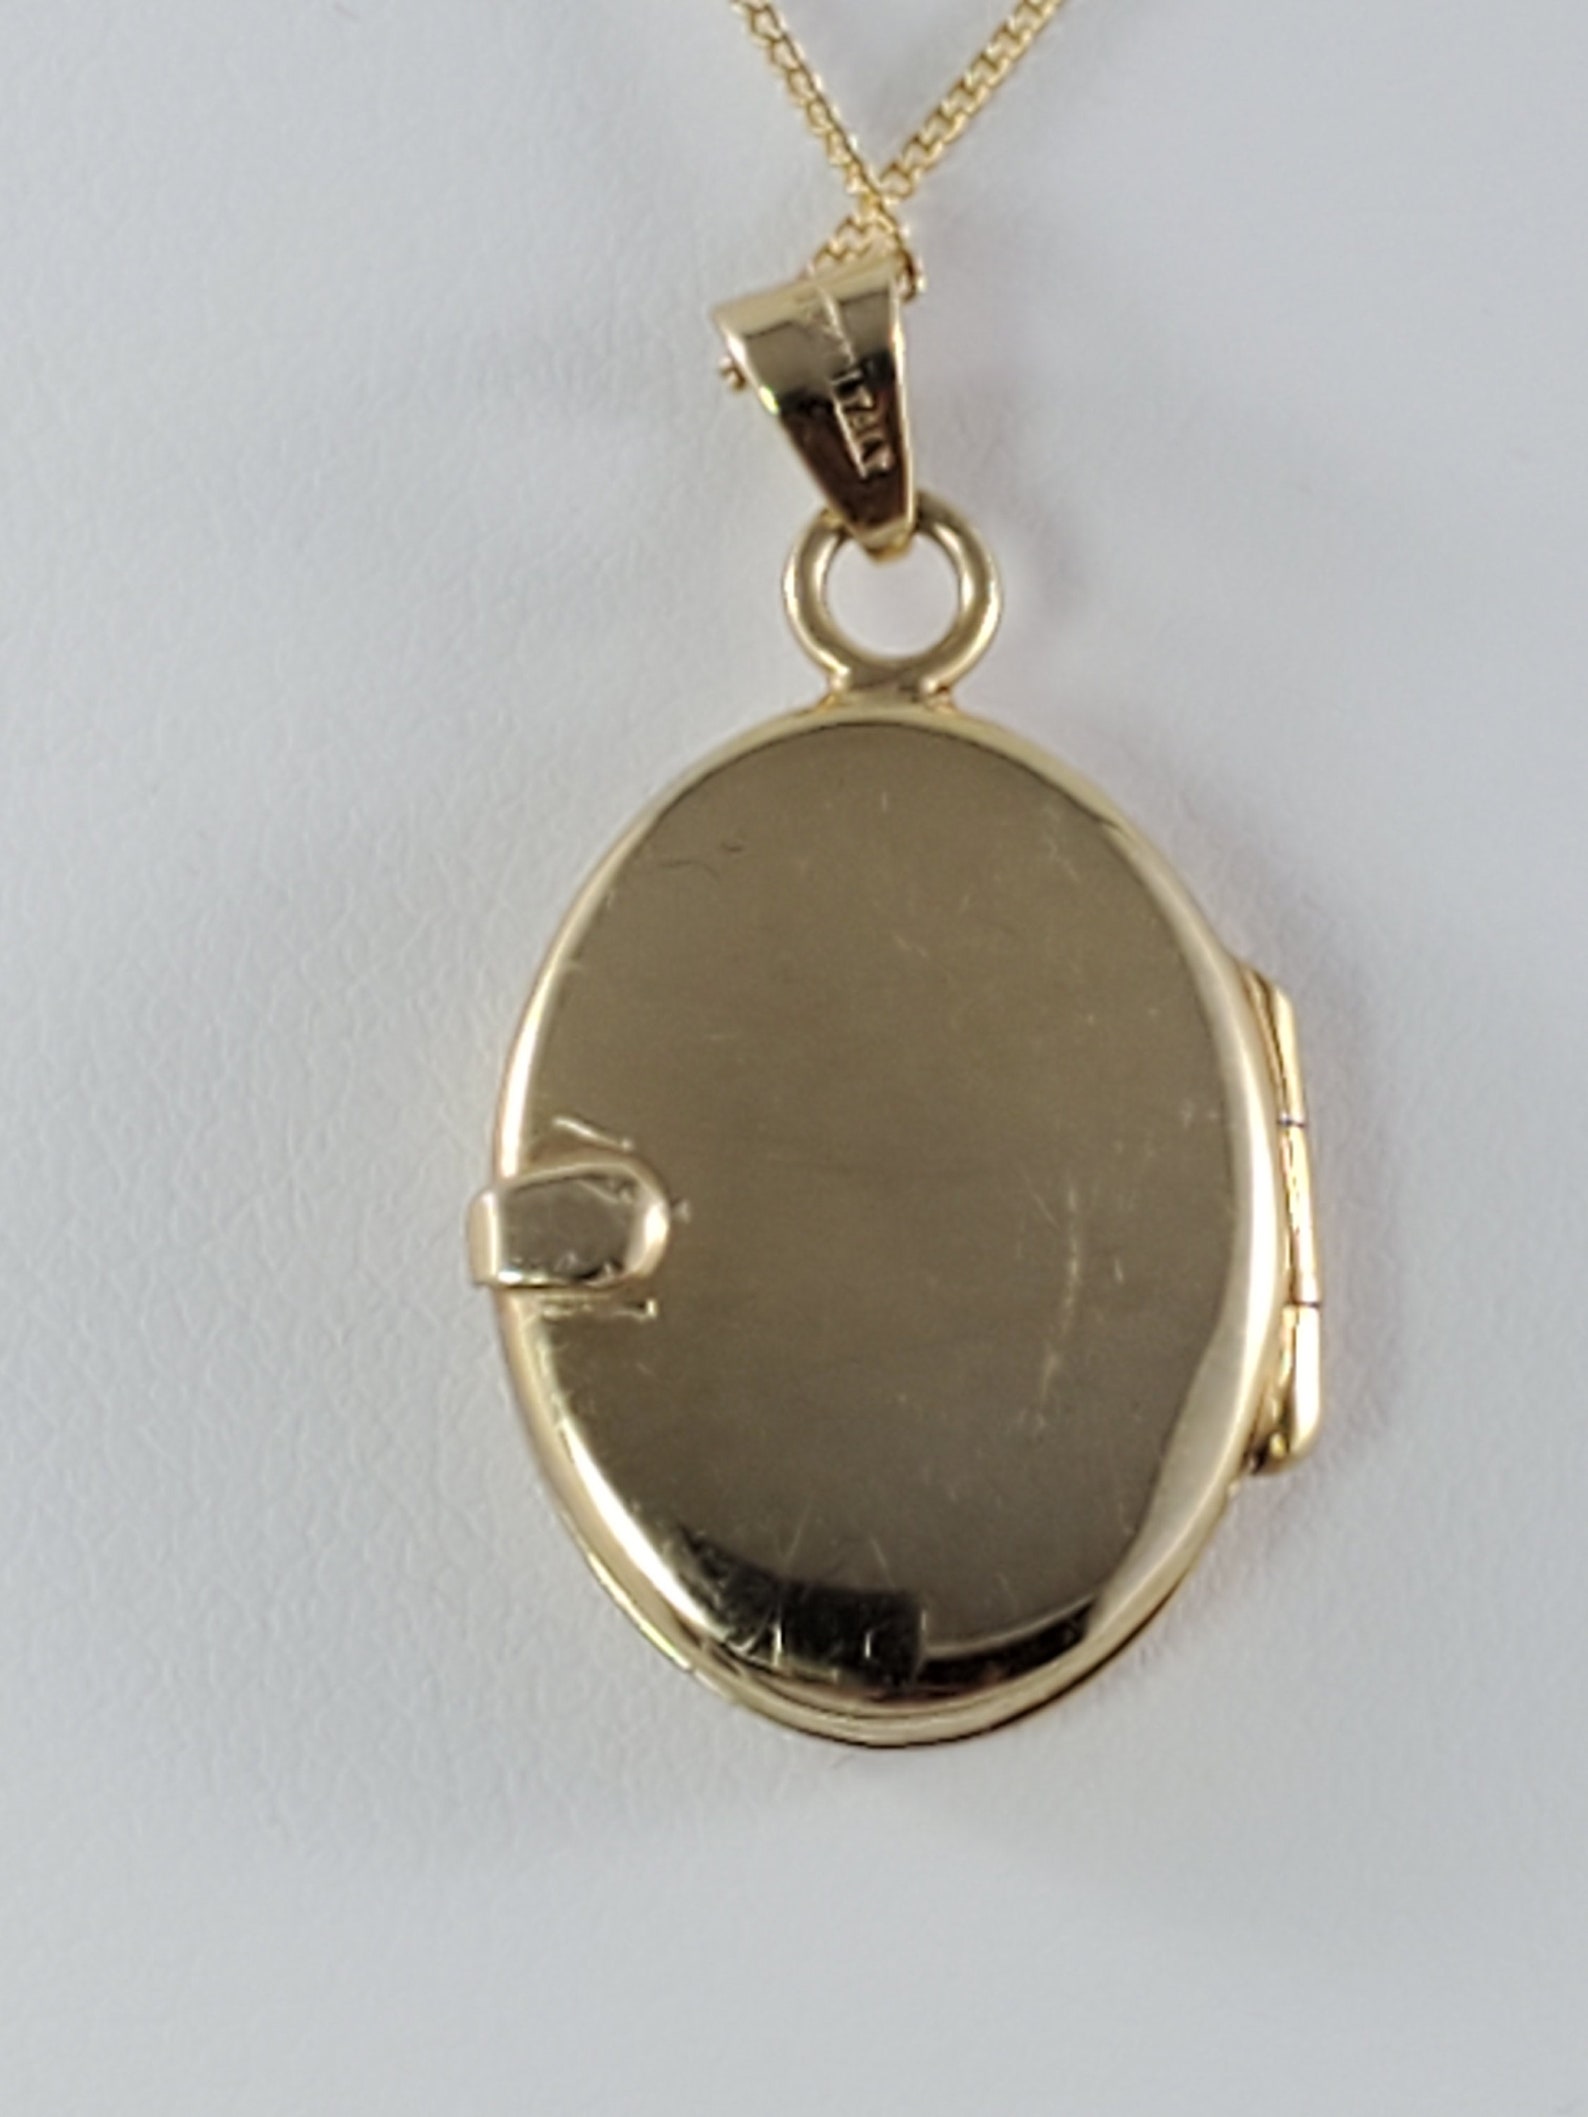 Gold Locket Necklace 10 Kt Gold Italian Oval Picture Locket on - Etsy